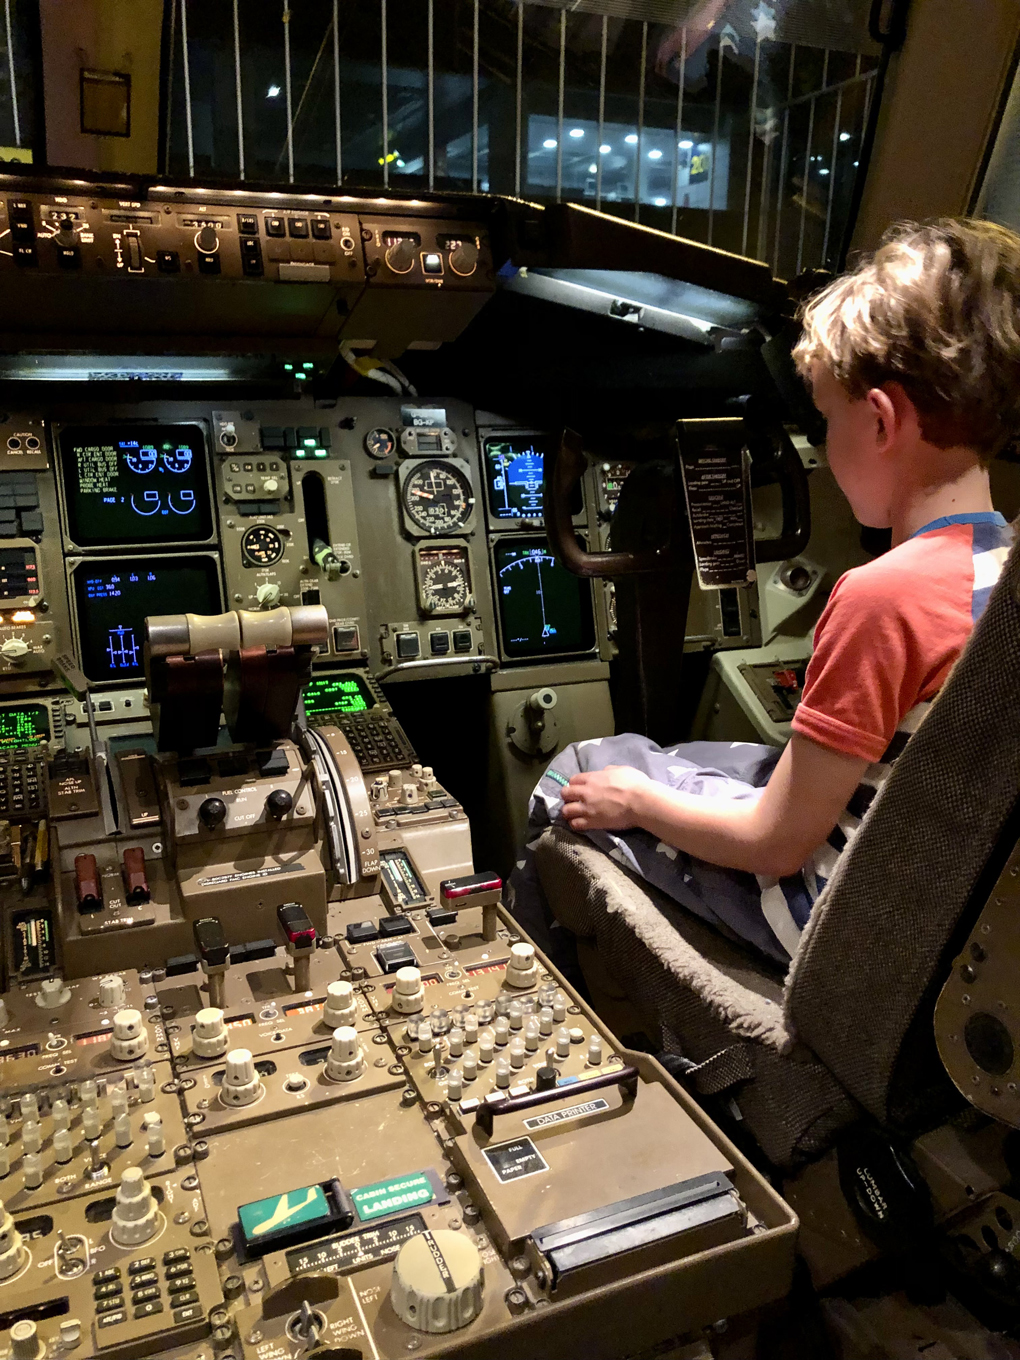 A small boy sat in the co-pilot seat of a aircraft cockpit